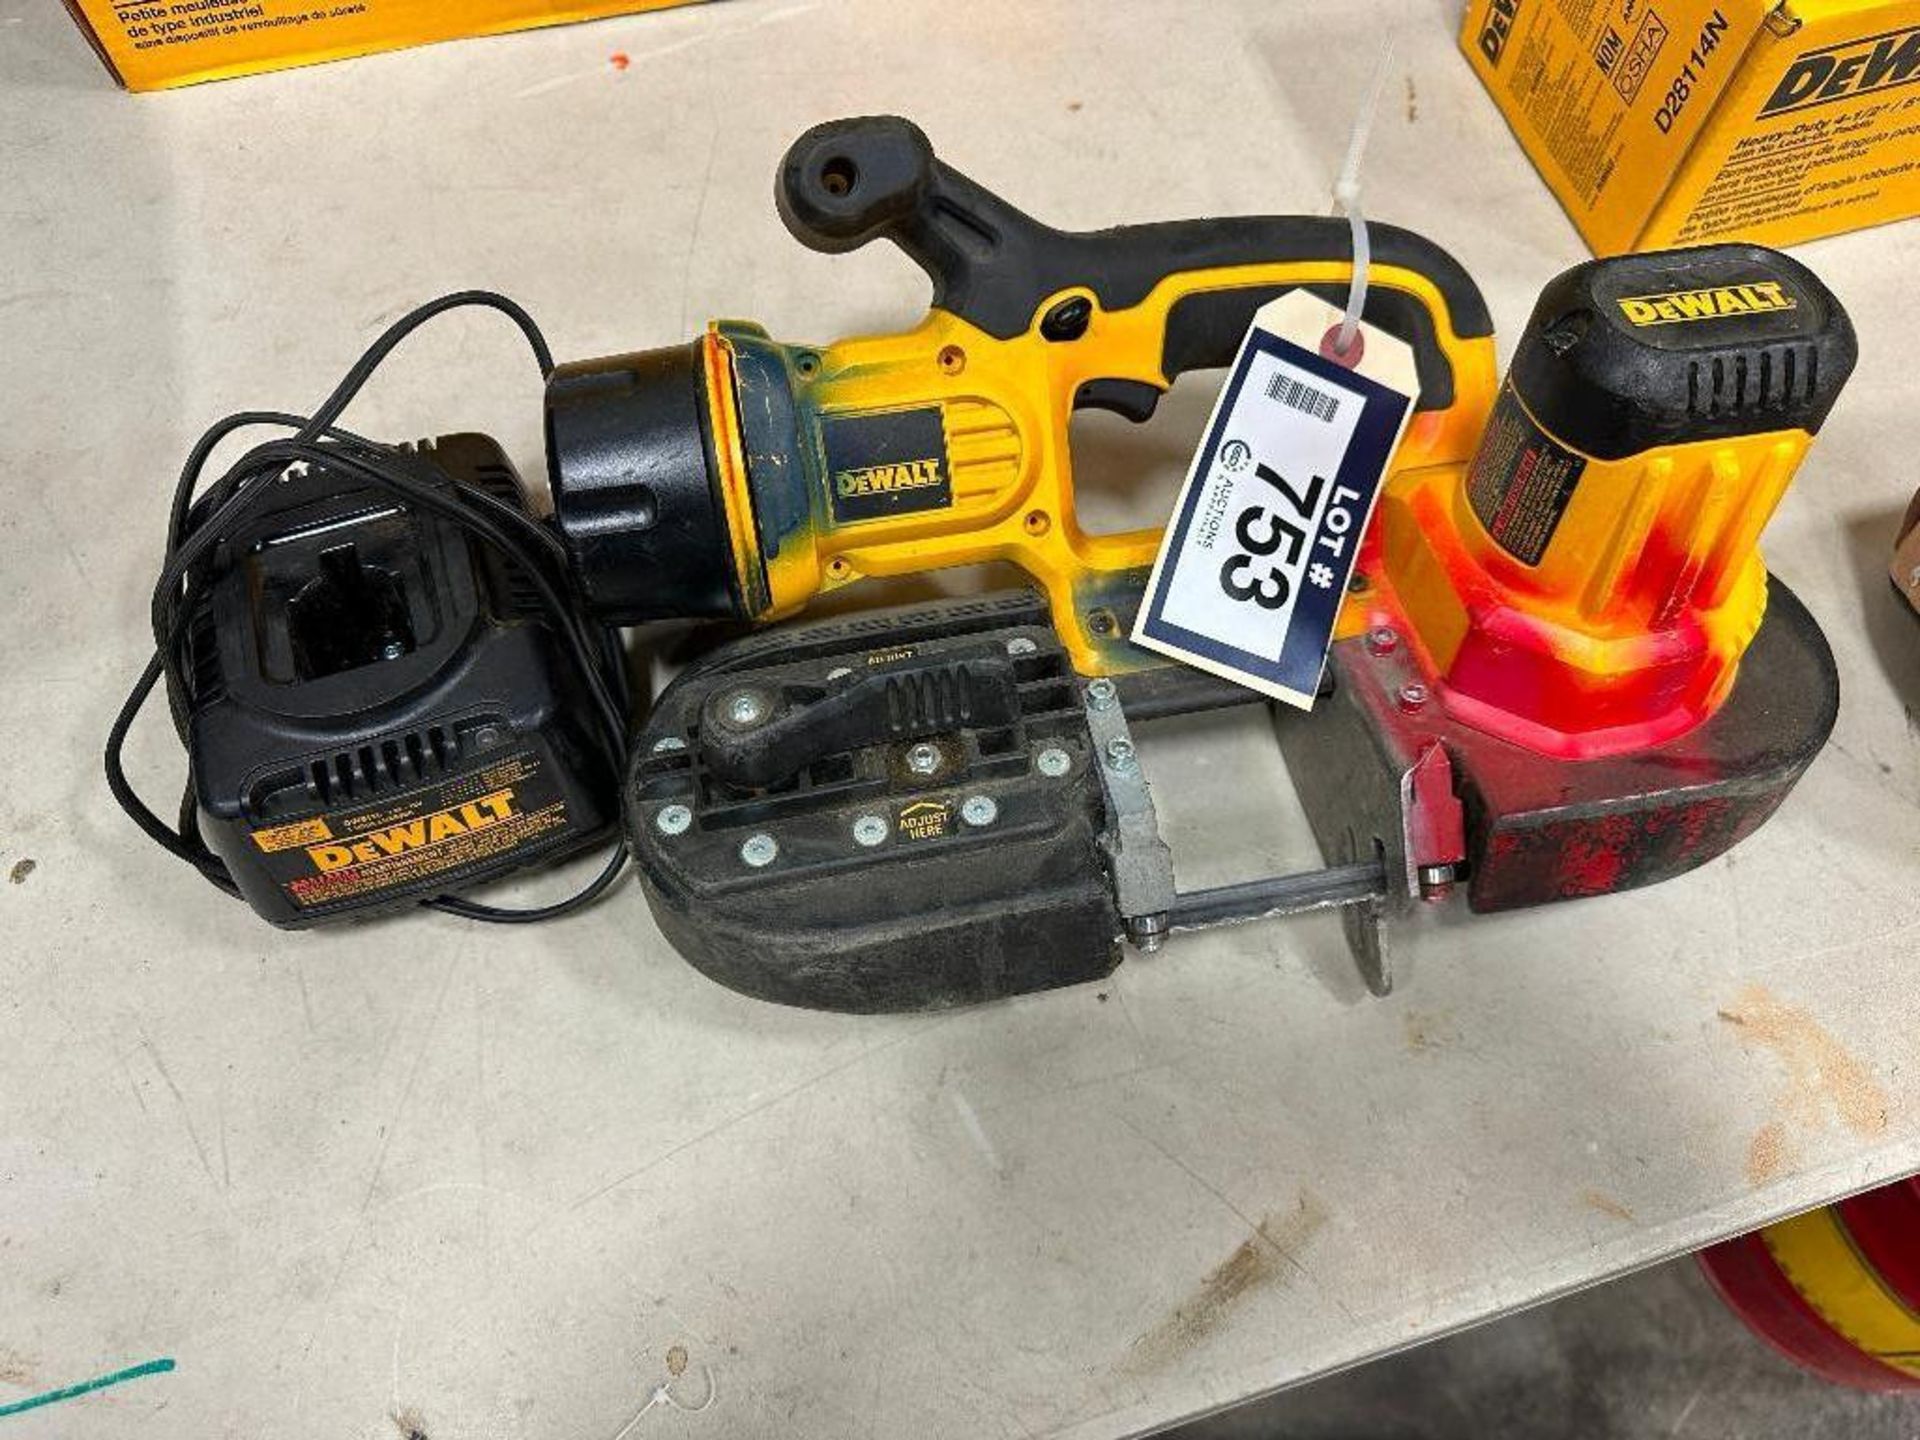 DeWalt DCS370 18V Cordless Band Saw w/ Battery and Charger - Image 2 of 6